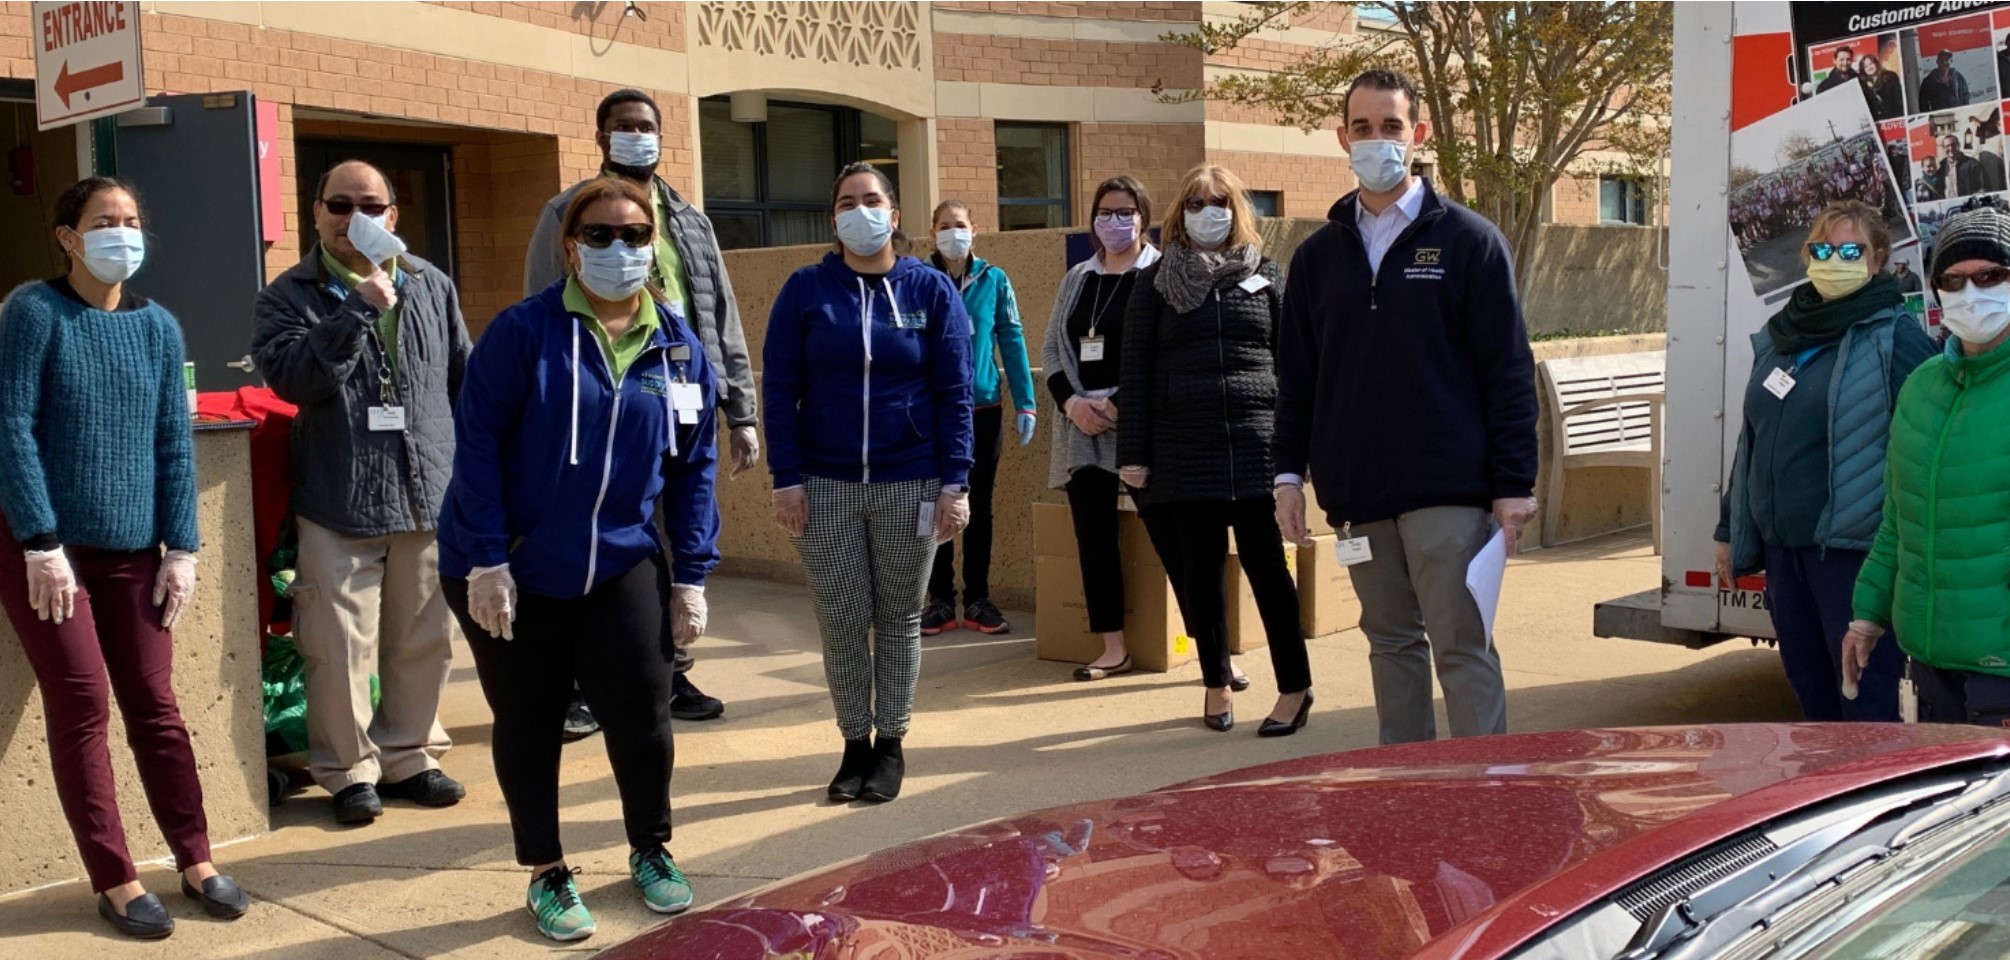 Goodwin Living staff team up to distribute the surgical masks